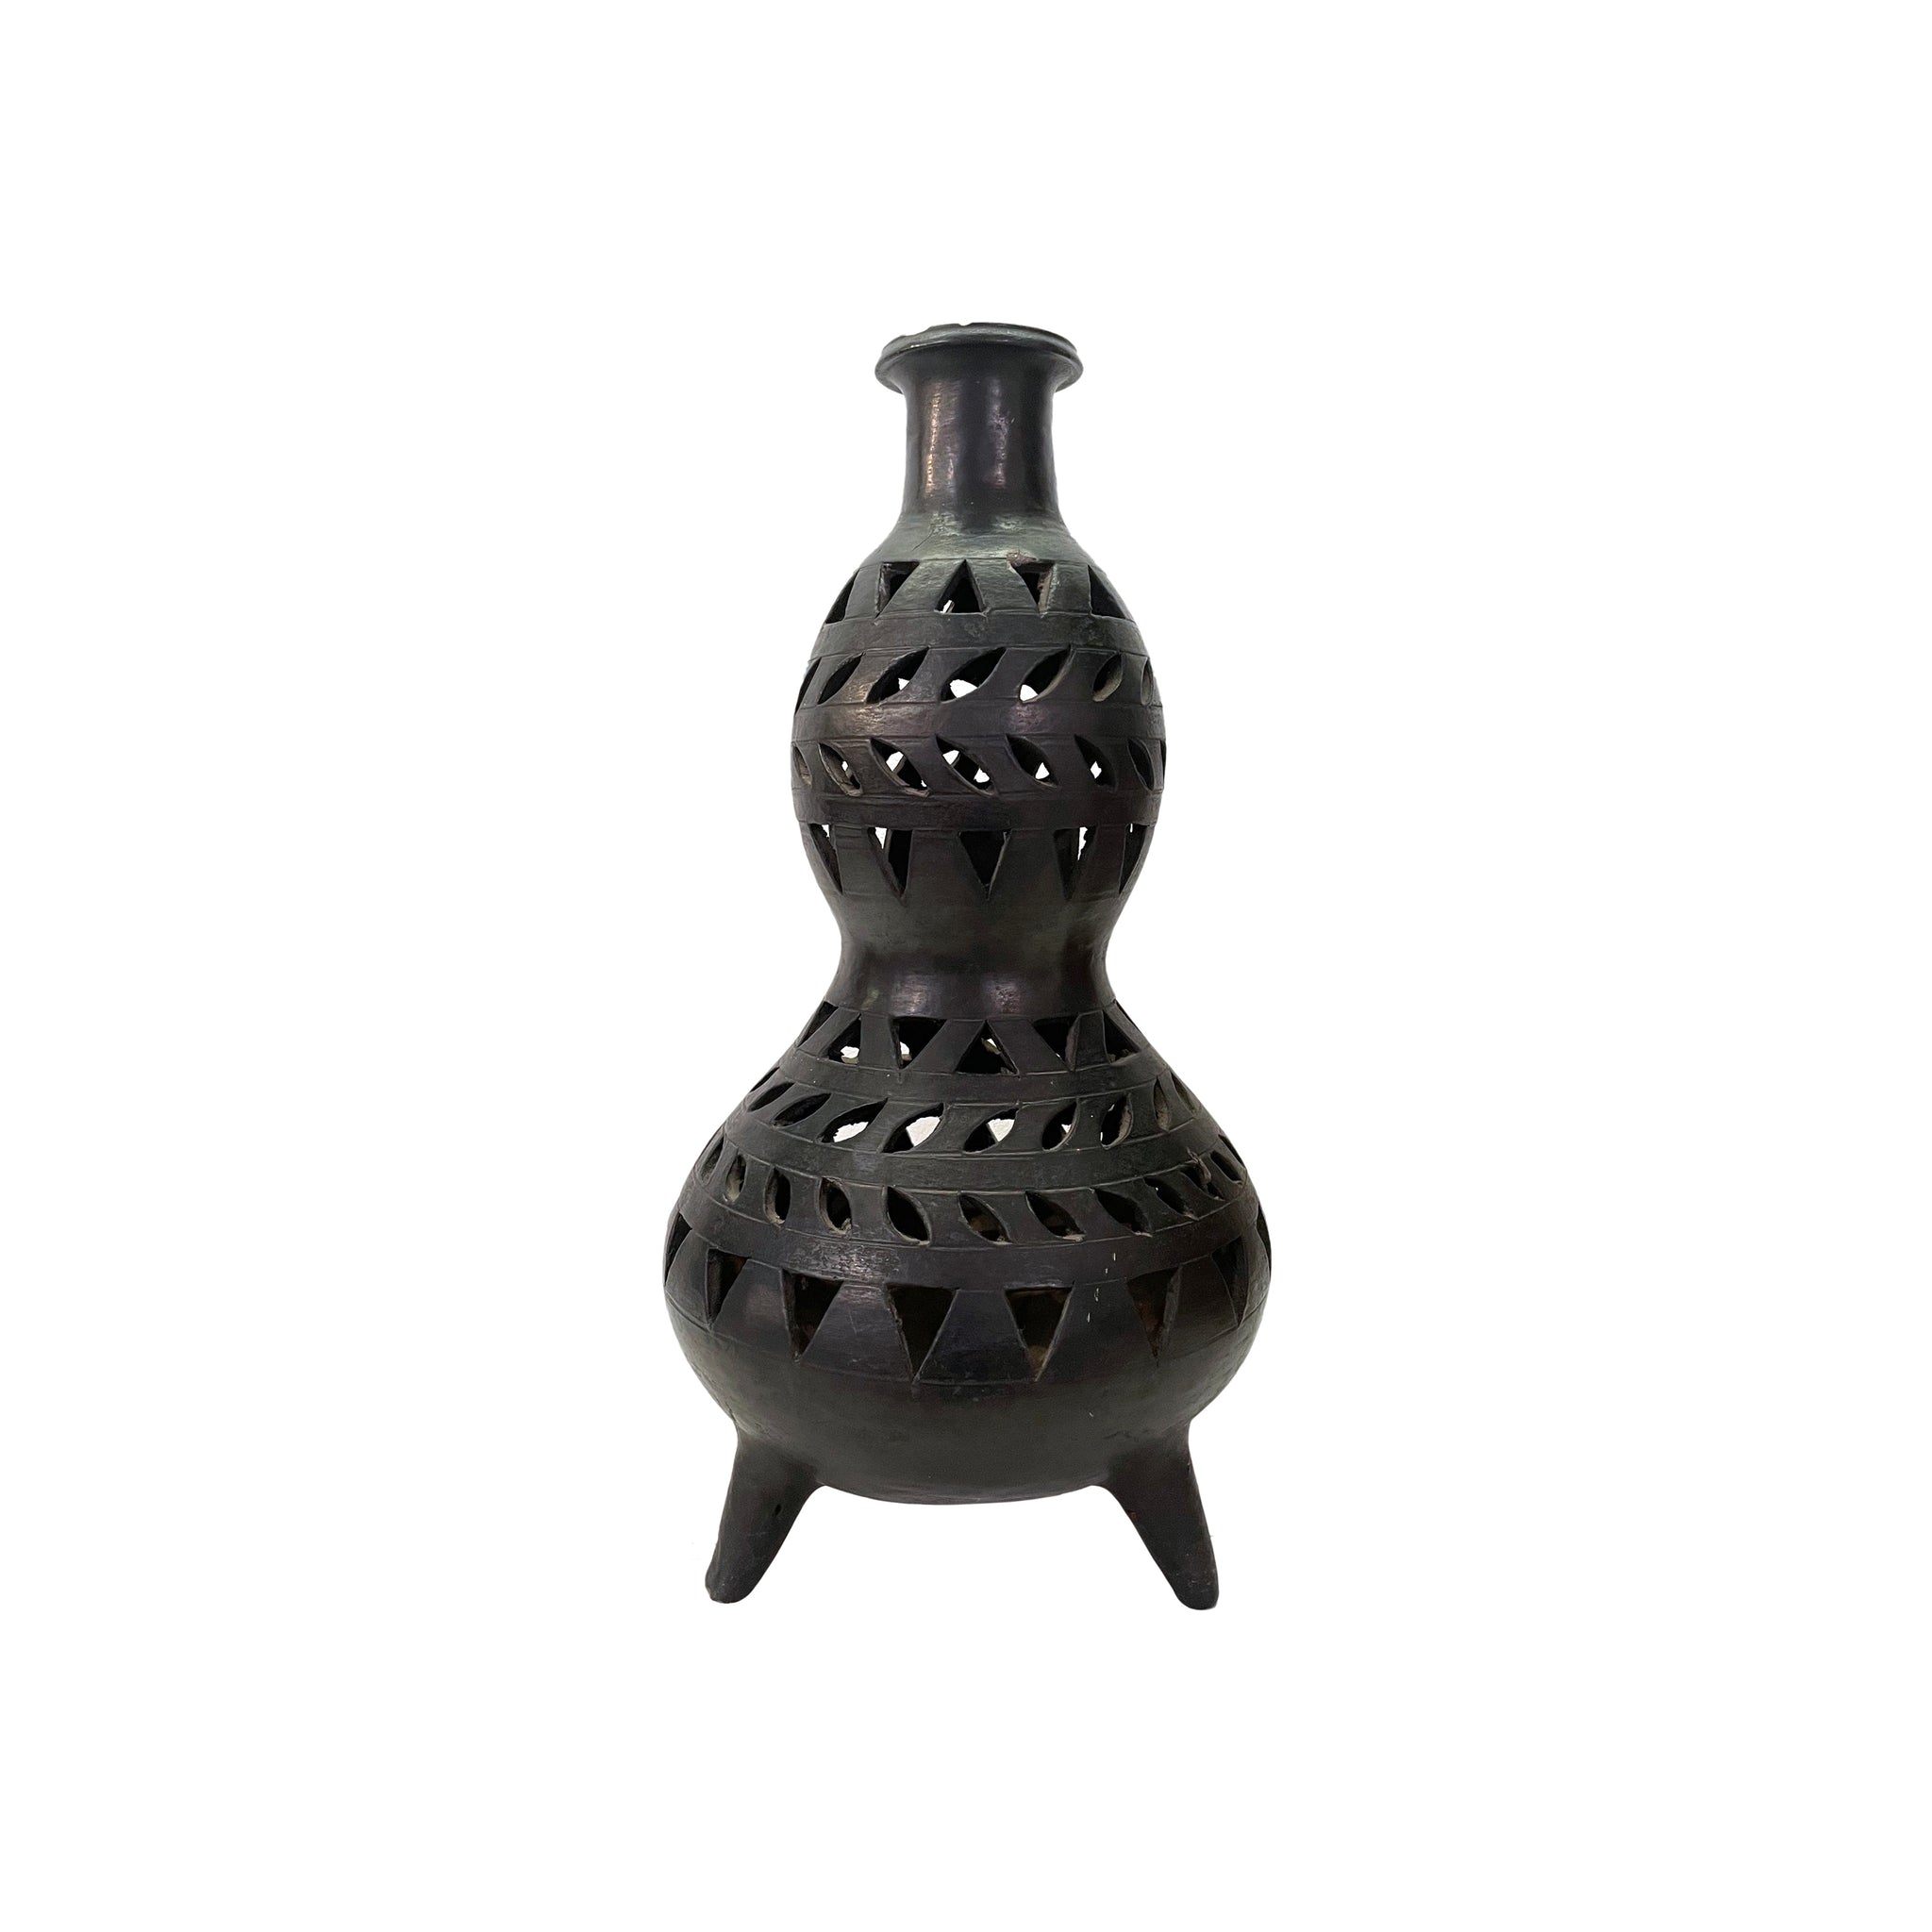 Oaxacan Tall Double Gourd Black Ceramic Vase with Geometric Cutouts